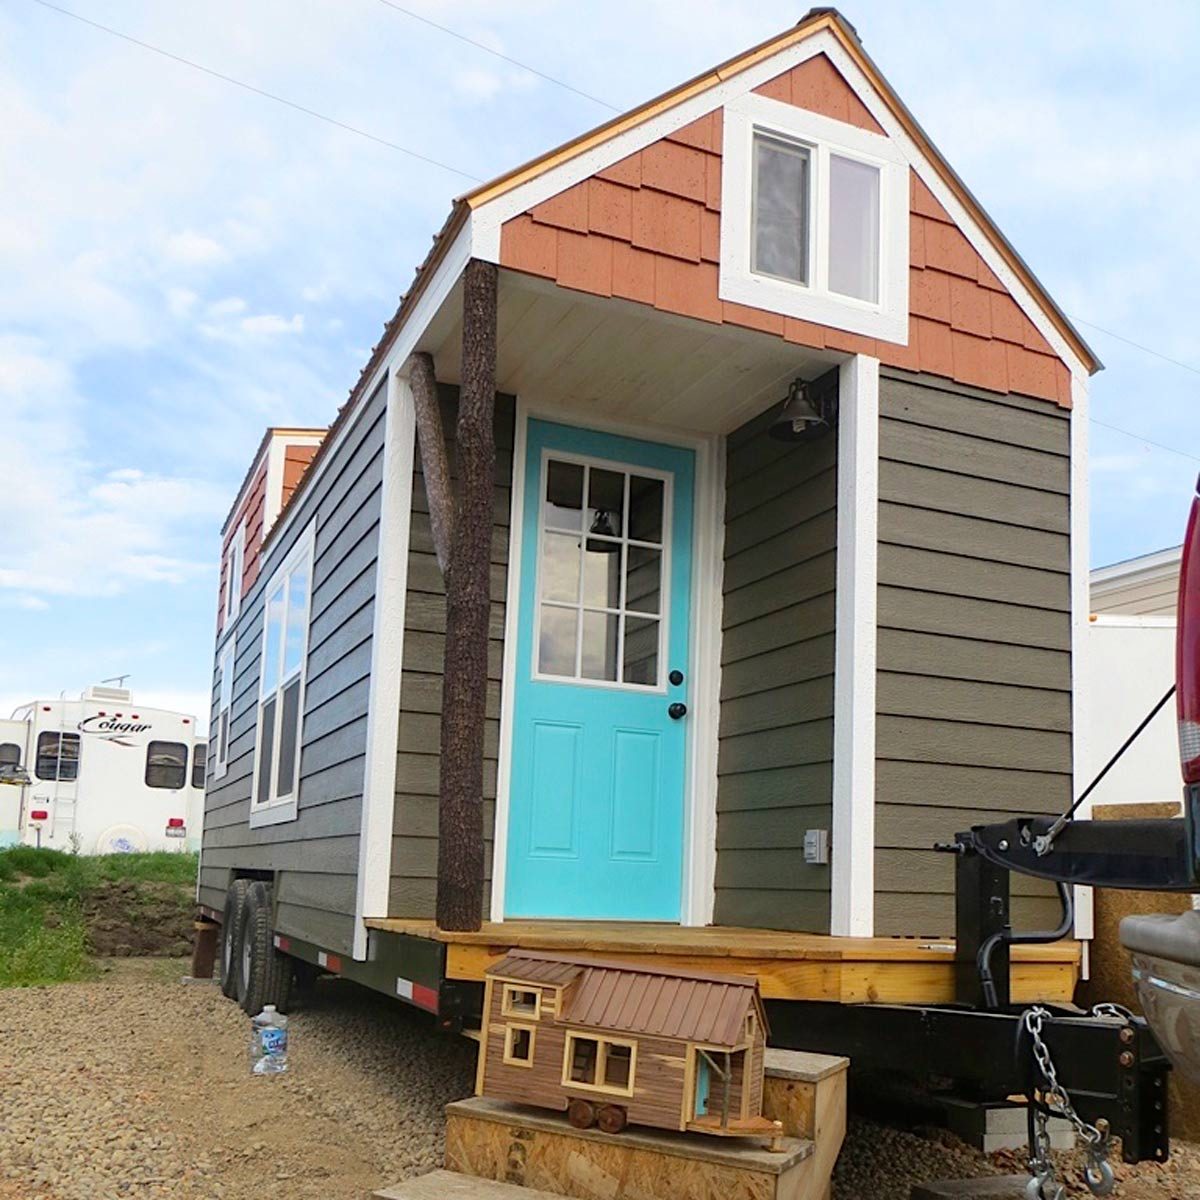 <p>Unless a tiny home is located on land the owner has purchased, there won’t be any additional value to the home. A tiny home isn’t necessarily going to <a href="https://www.familyhandyman.com/list/the-best-and-worst-projects-to-improve-your-home-resale-value/">increase in value</a> because the neighborhood suddenly becomes a hot market. But then again, ideally, a tiny home isn’t paying property taxes either.</p> <p>The price per square foot for <a href="https://www.realtor.com/news/trends/strange-allure-of-tiny-homes-explained/" rel="nofollow">a tiny home (500 square feet or less) averages $201 a square foot, according to realtor.com.</a> A home between 501 and 1,000 square feet averages $96 per square foot. The average cost of building your own tiny house is $25,000, according to <a href="http://thetinylife.com/the-fallacy-of-a-tiny-house/" rel="nofollow">The Tiny Life</a>.</p>